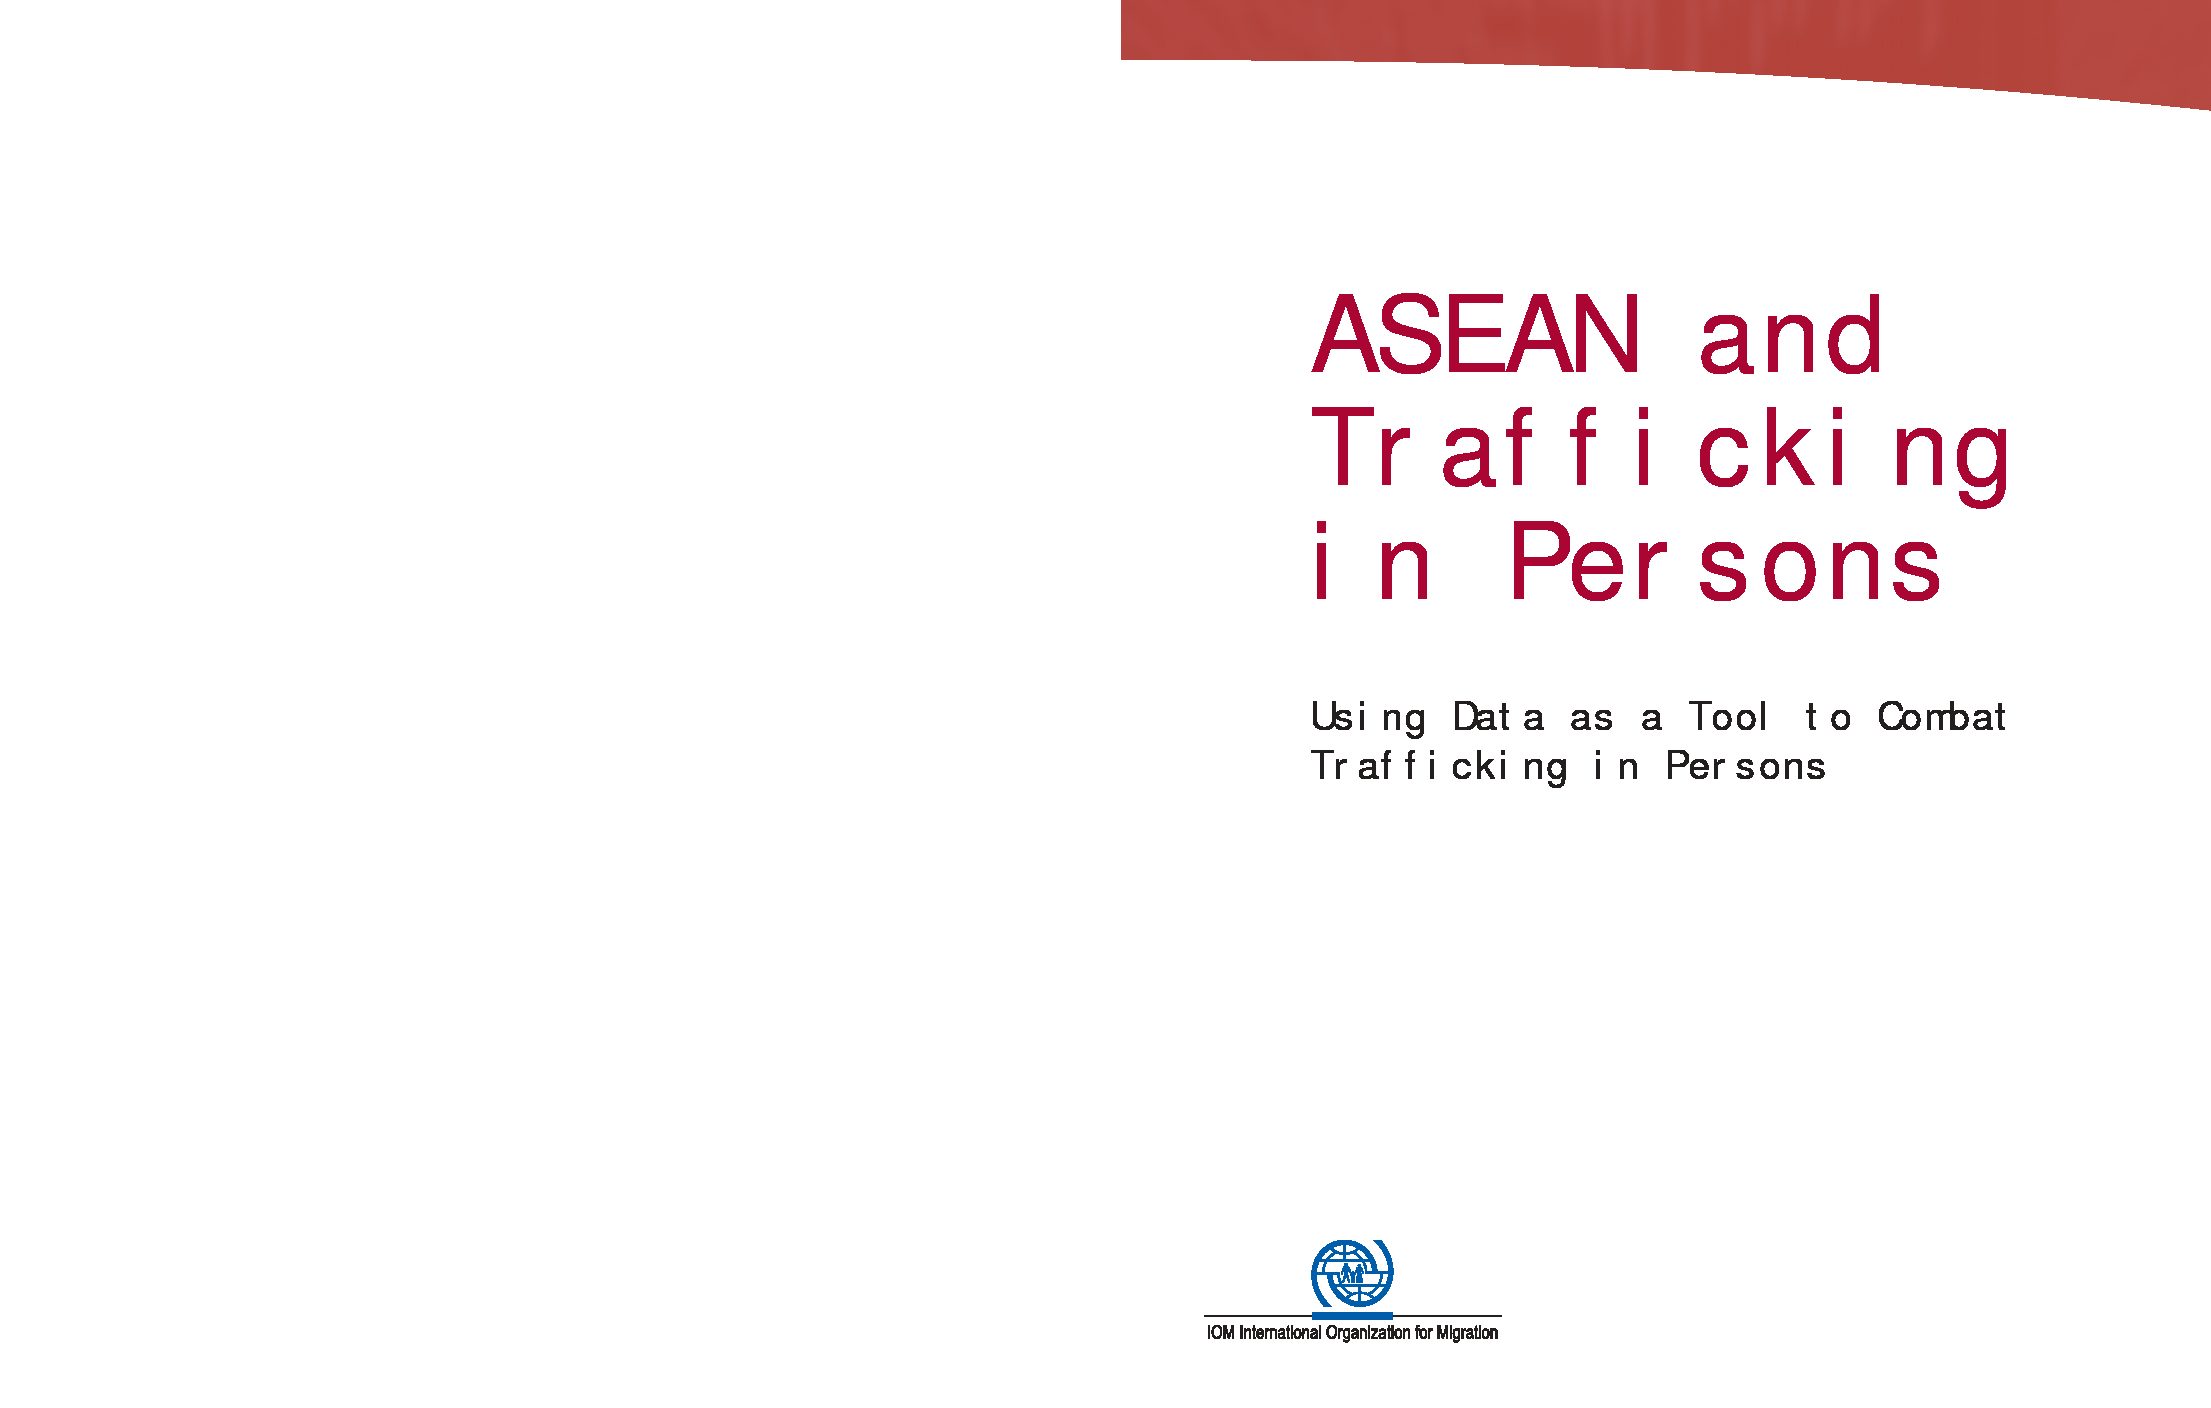 ASEAN and Trafficking in Persons: Using Data as a Tool to Combat Trafficking in Persons